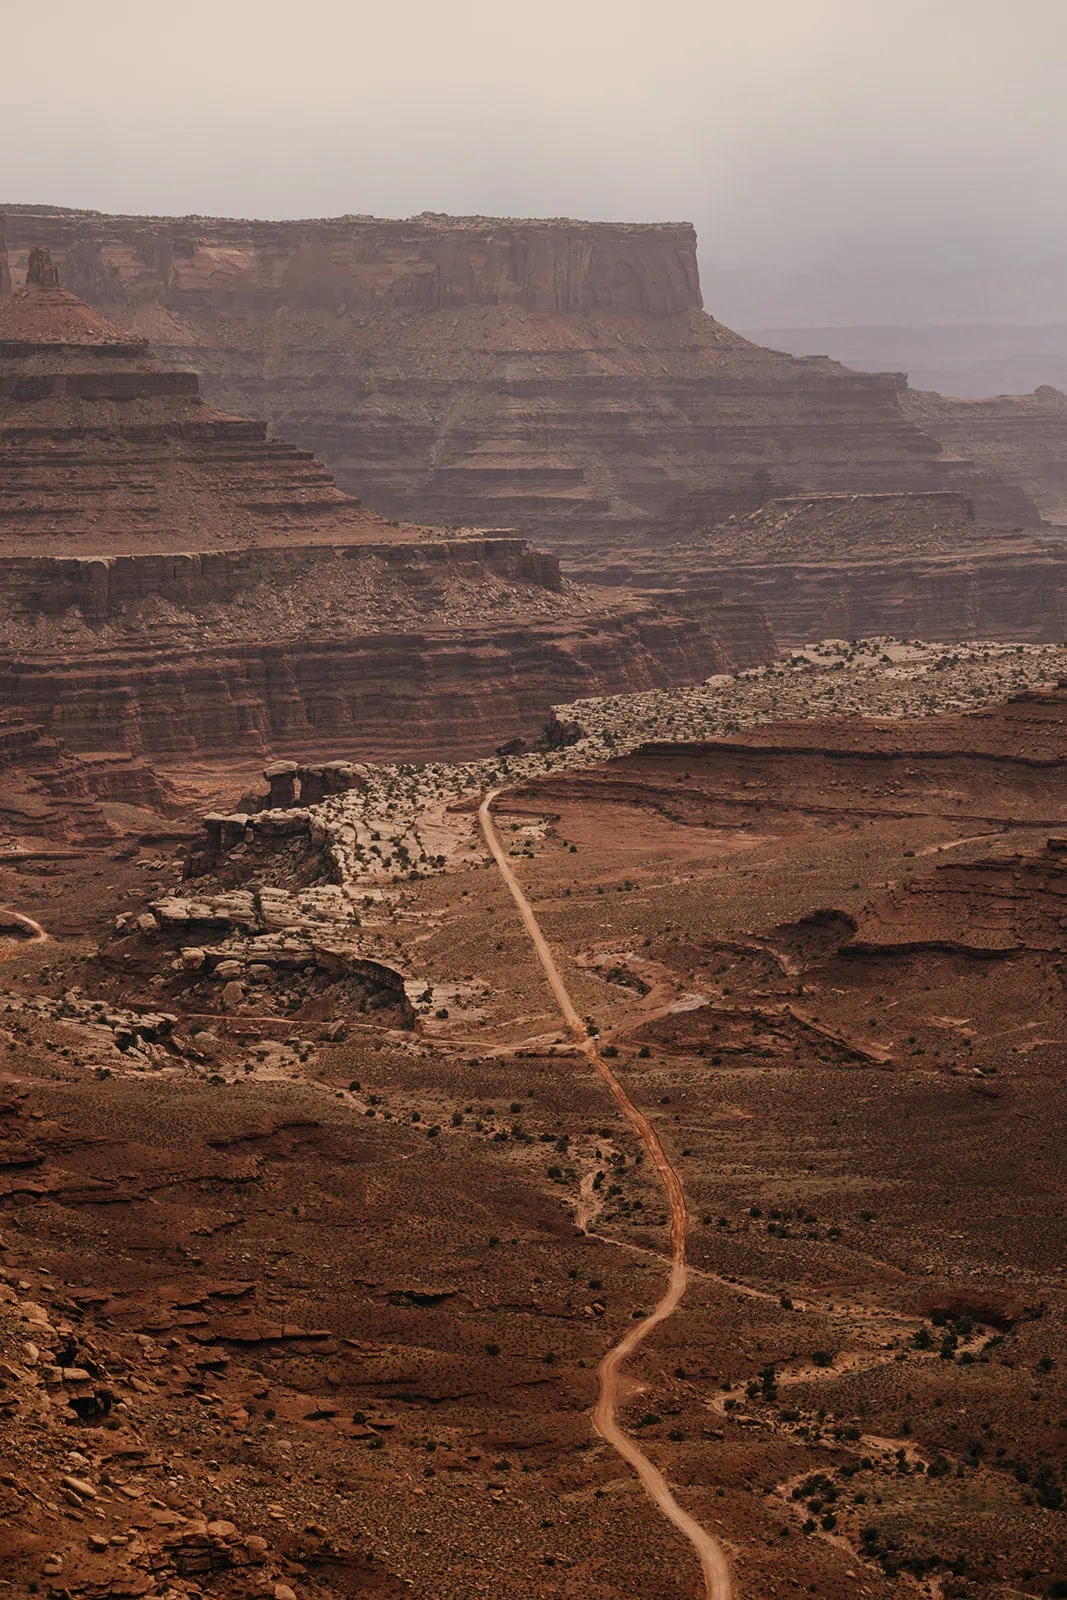 A high up view from the iconic Shafer trail